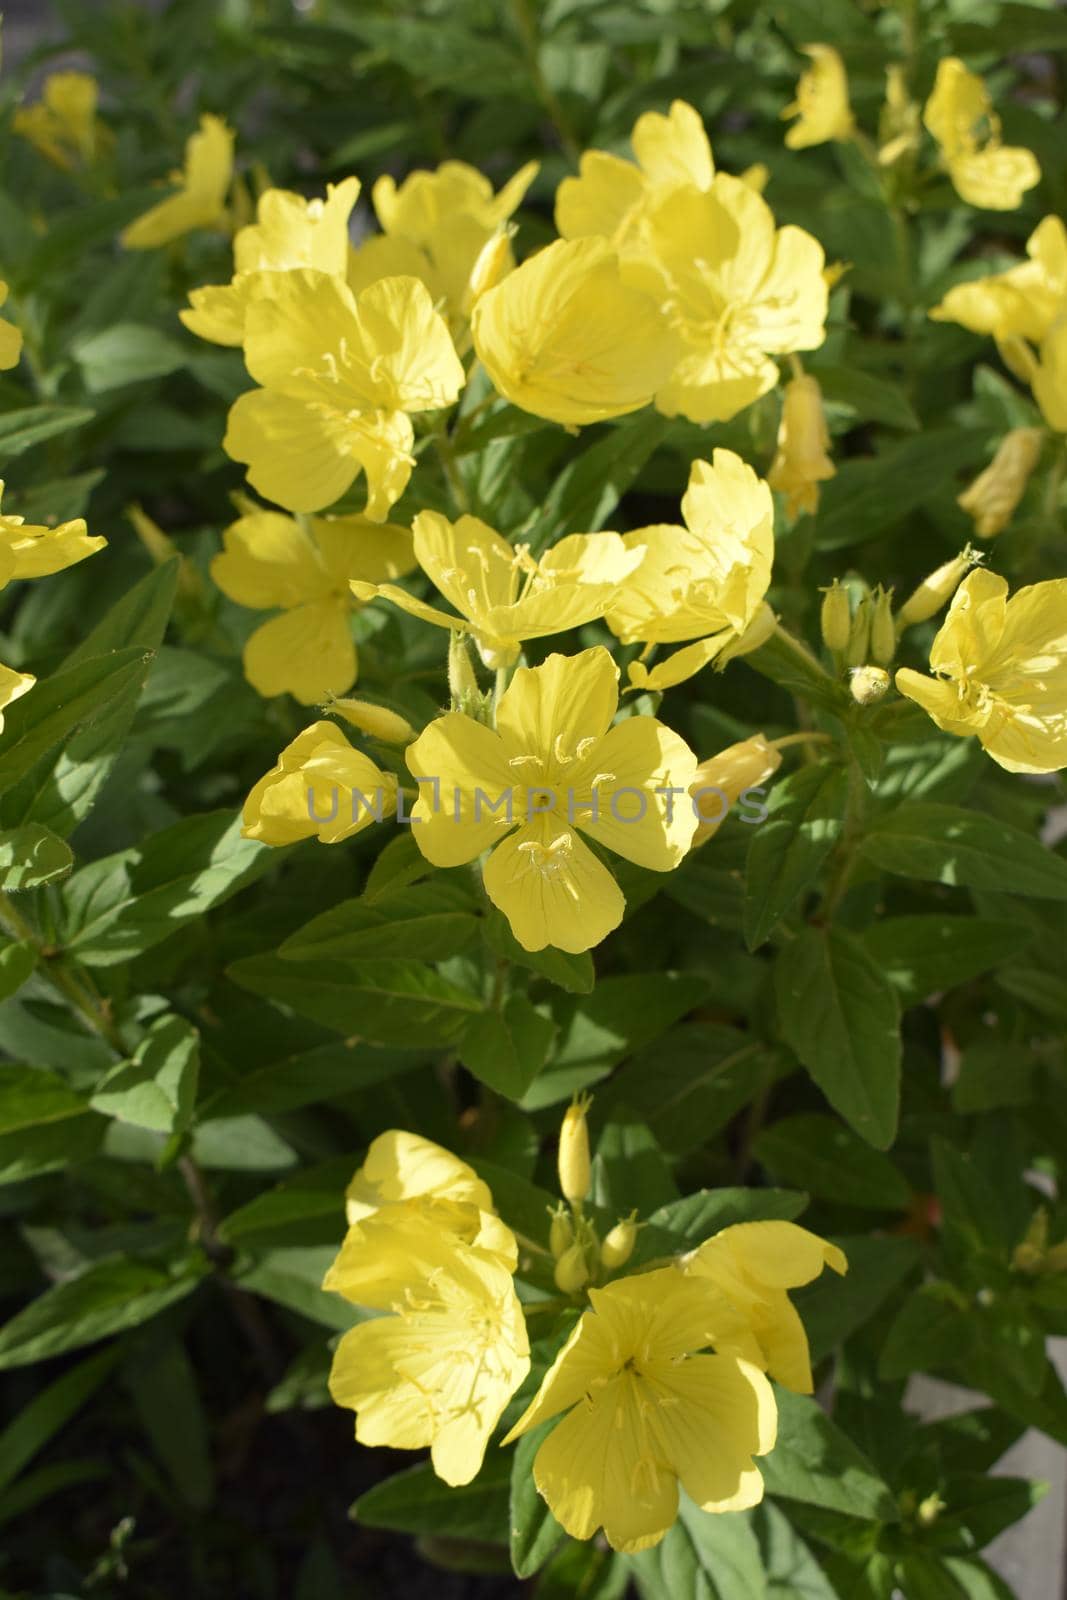 Enotera shrubby (Oenothera) - a perennial yellow flower in the garden, close-up